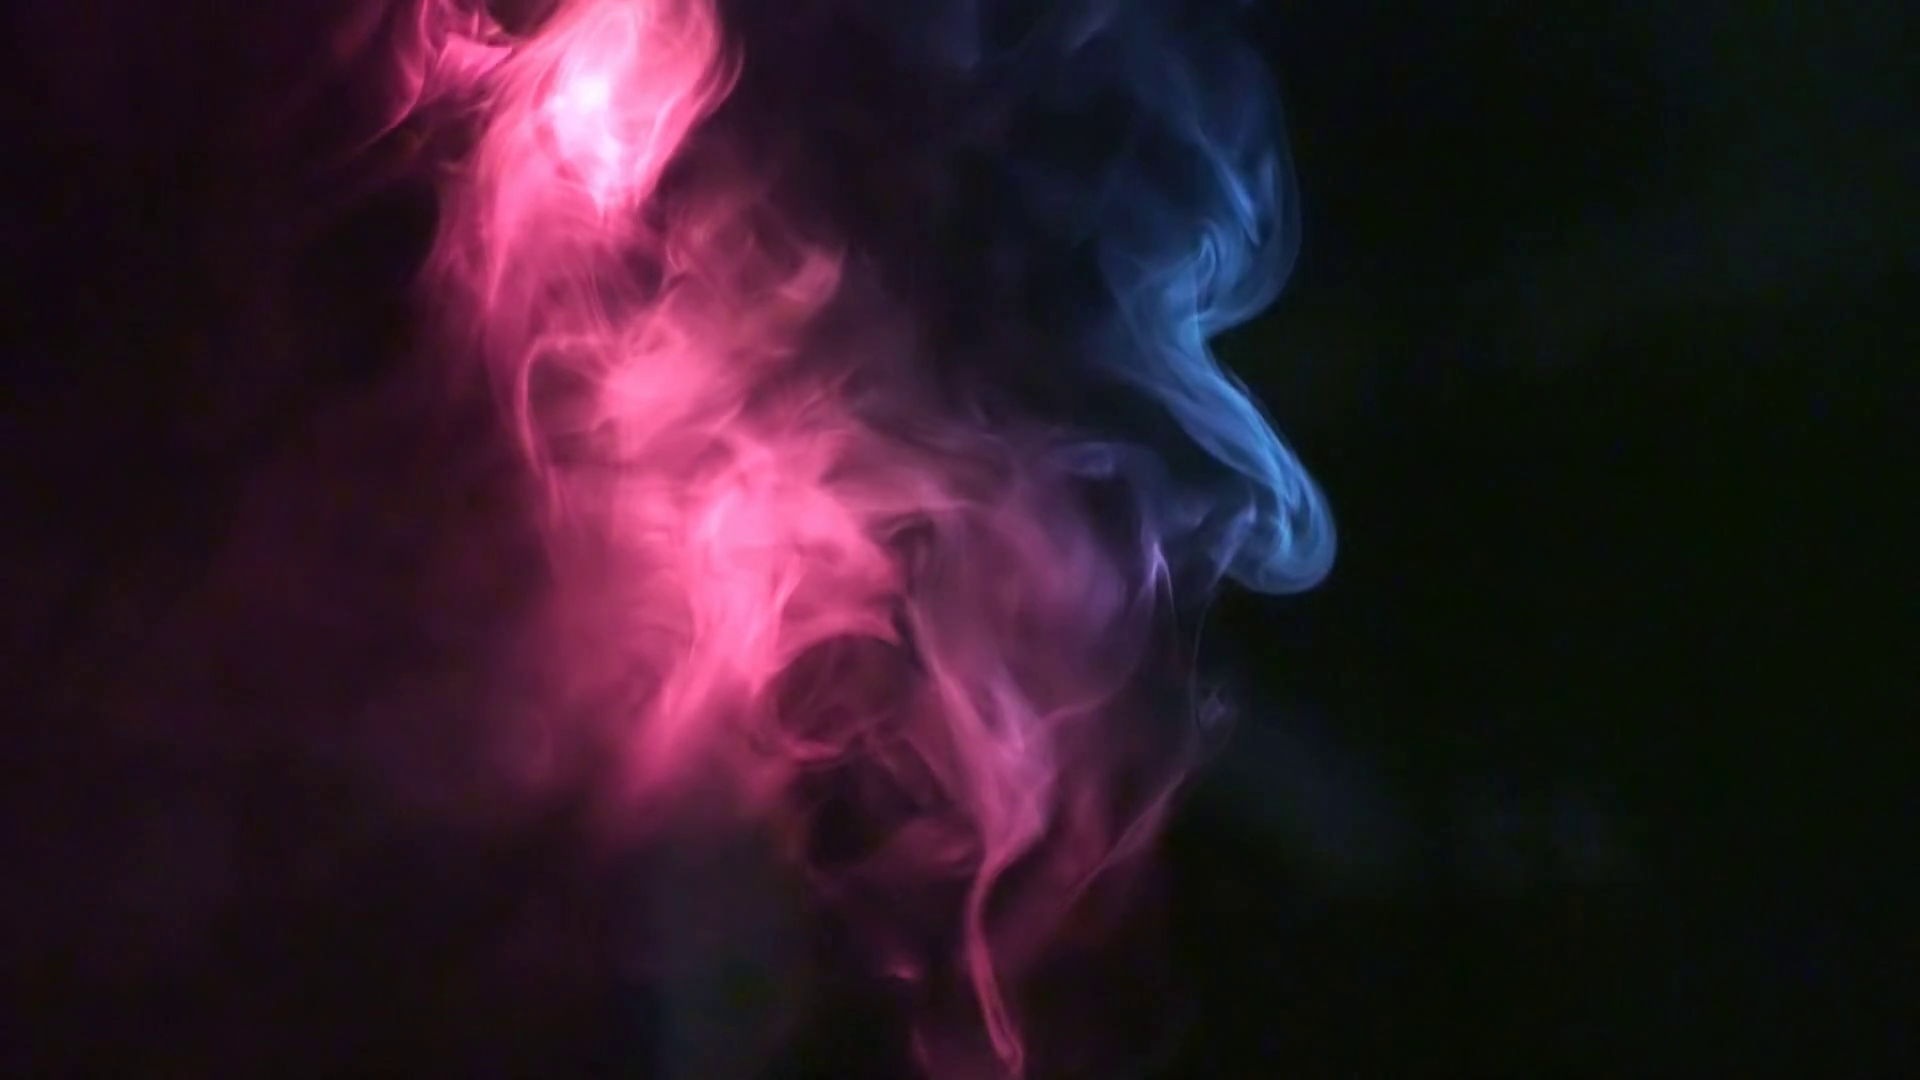 Smoke Concert Colorful Video Background Stock Video Footage ...